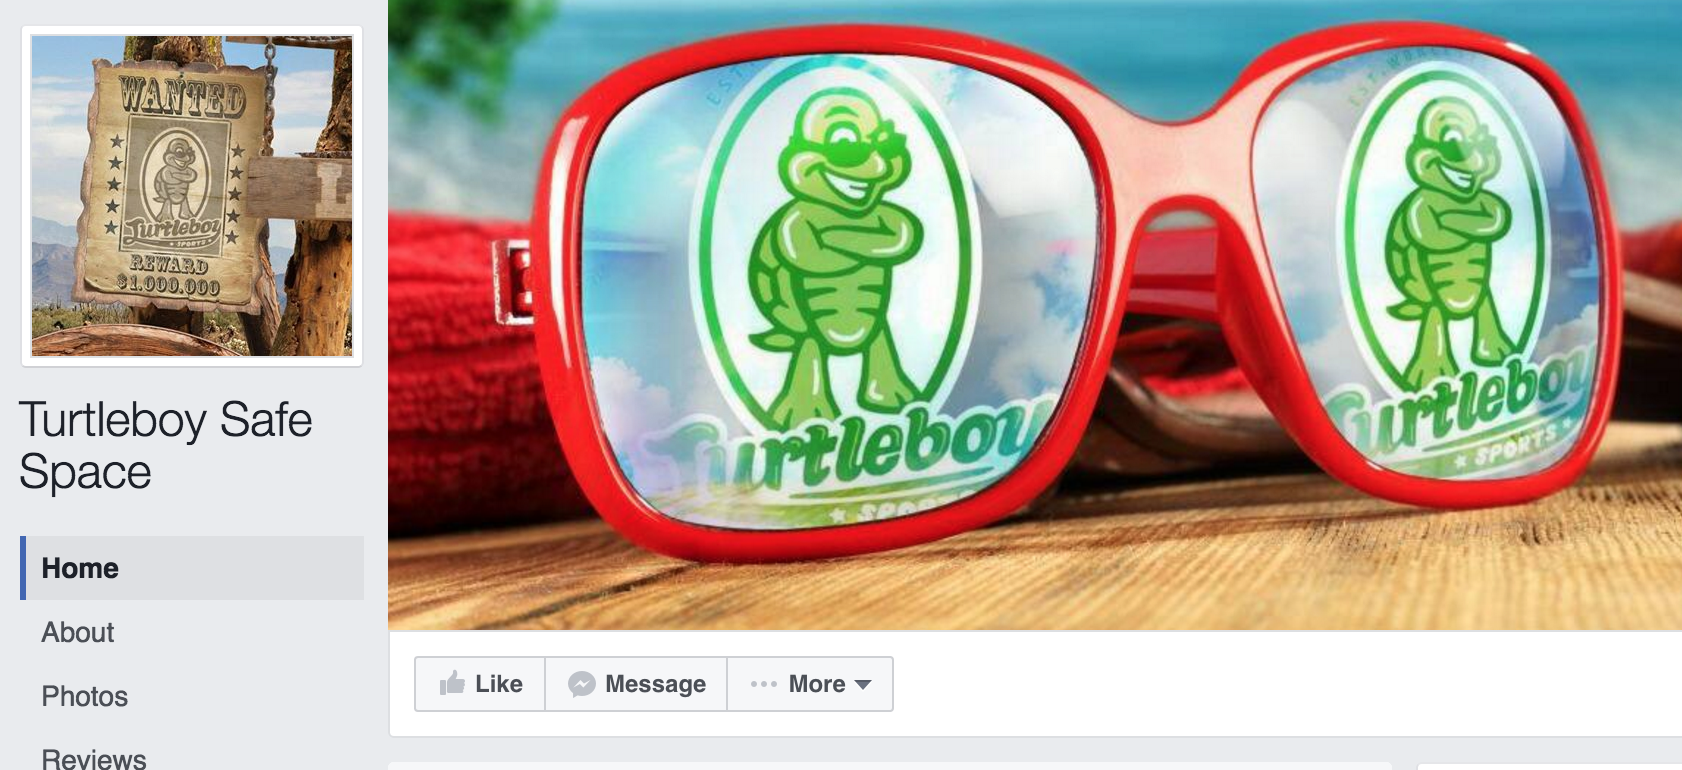 Our 2 Facebook Pages Are Suspended So Make Sure To Like The New Turtleboy Safe Space